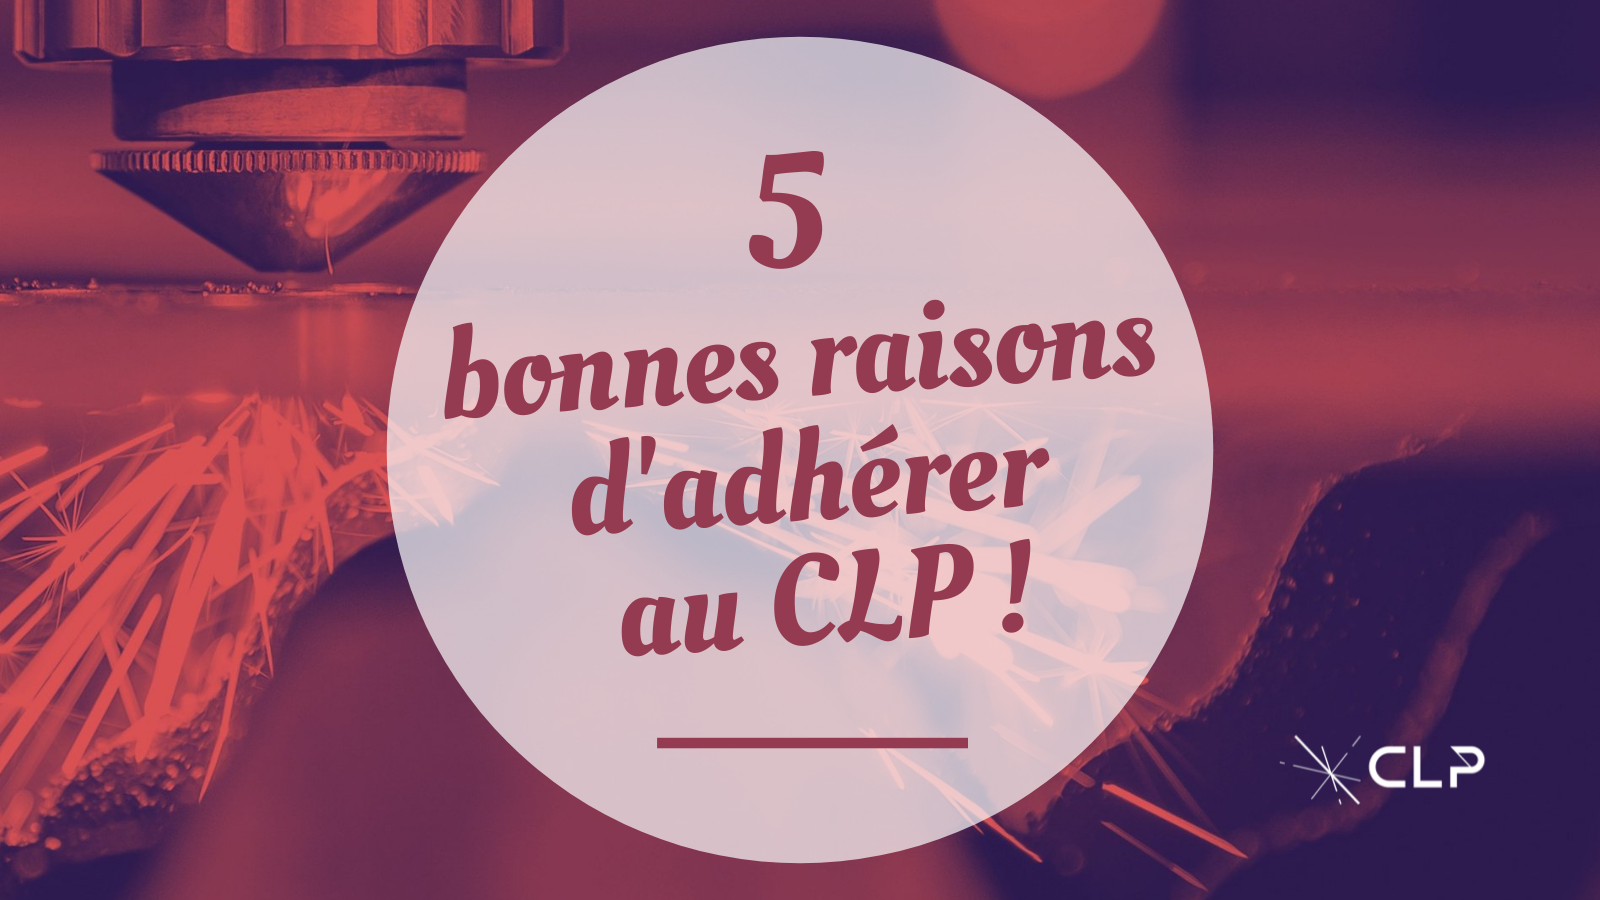 5 REASONS TO JOIN THE CLP !